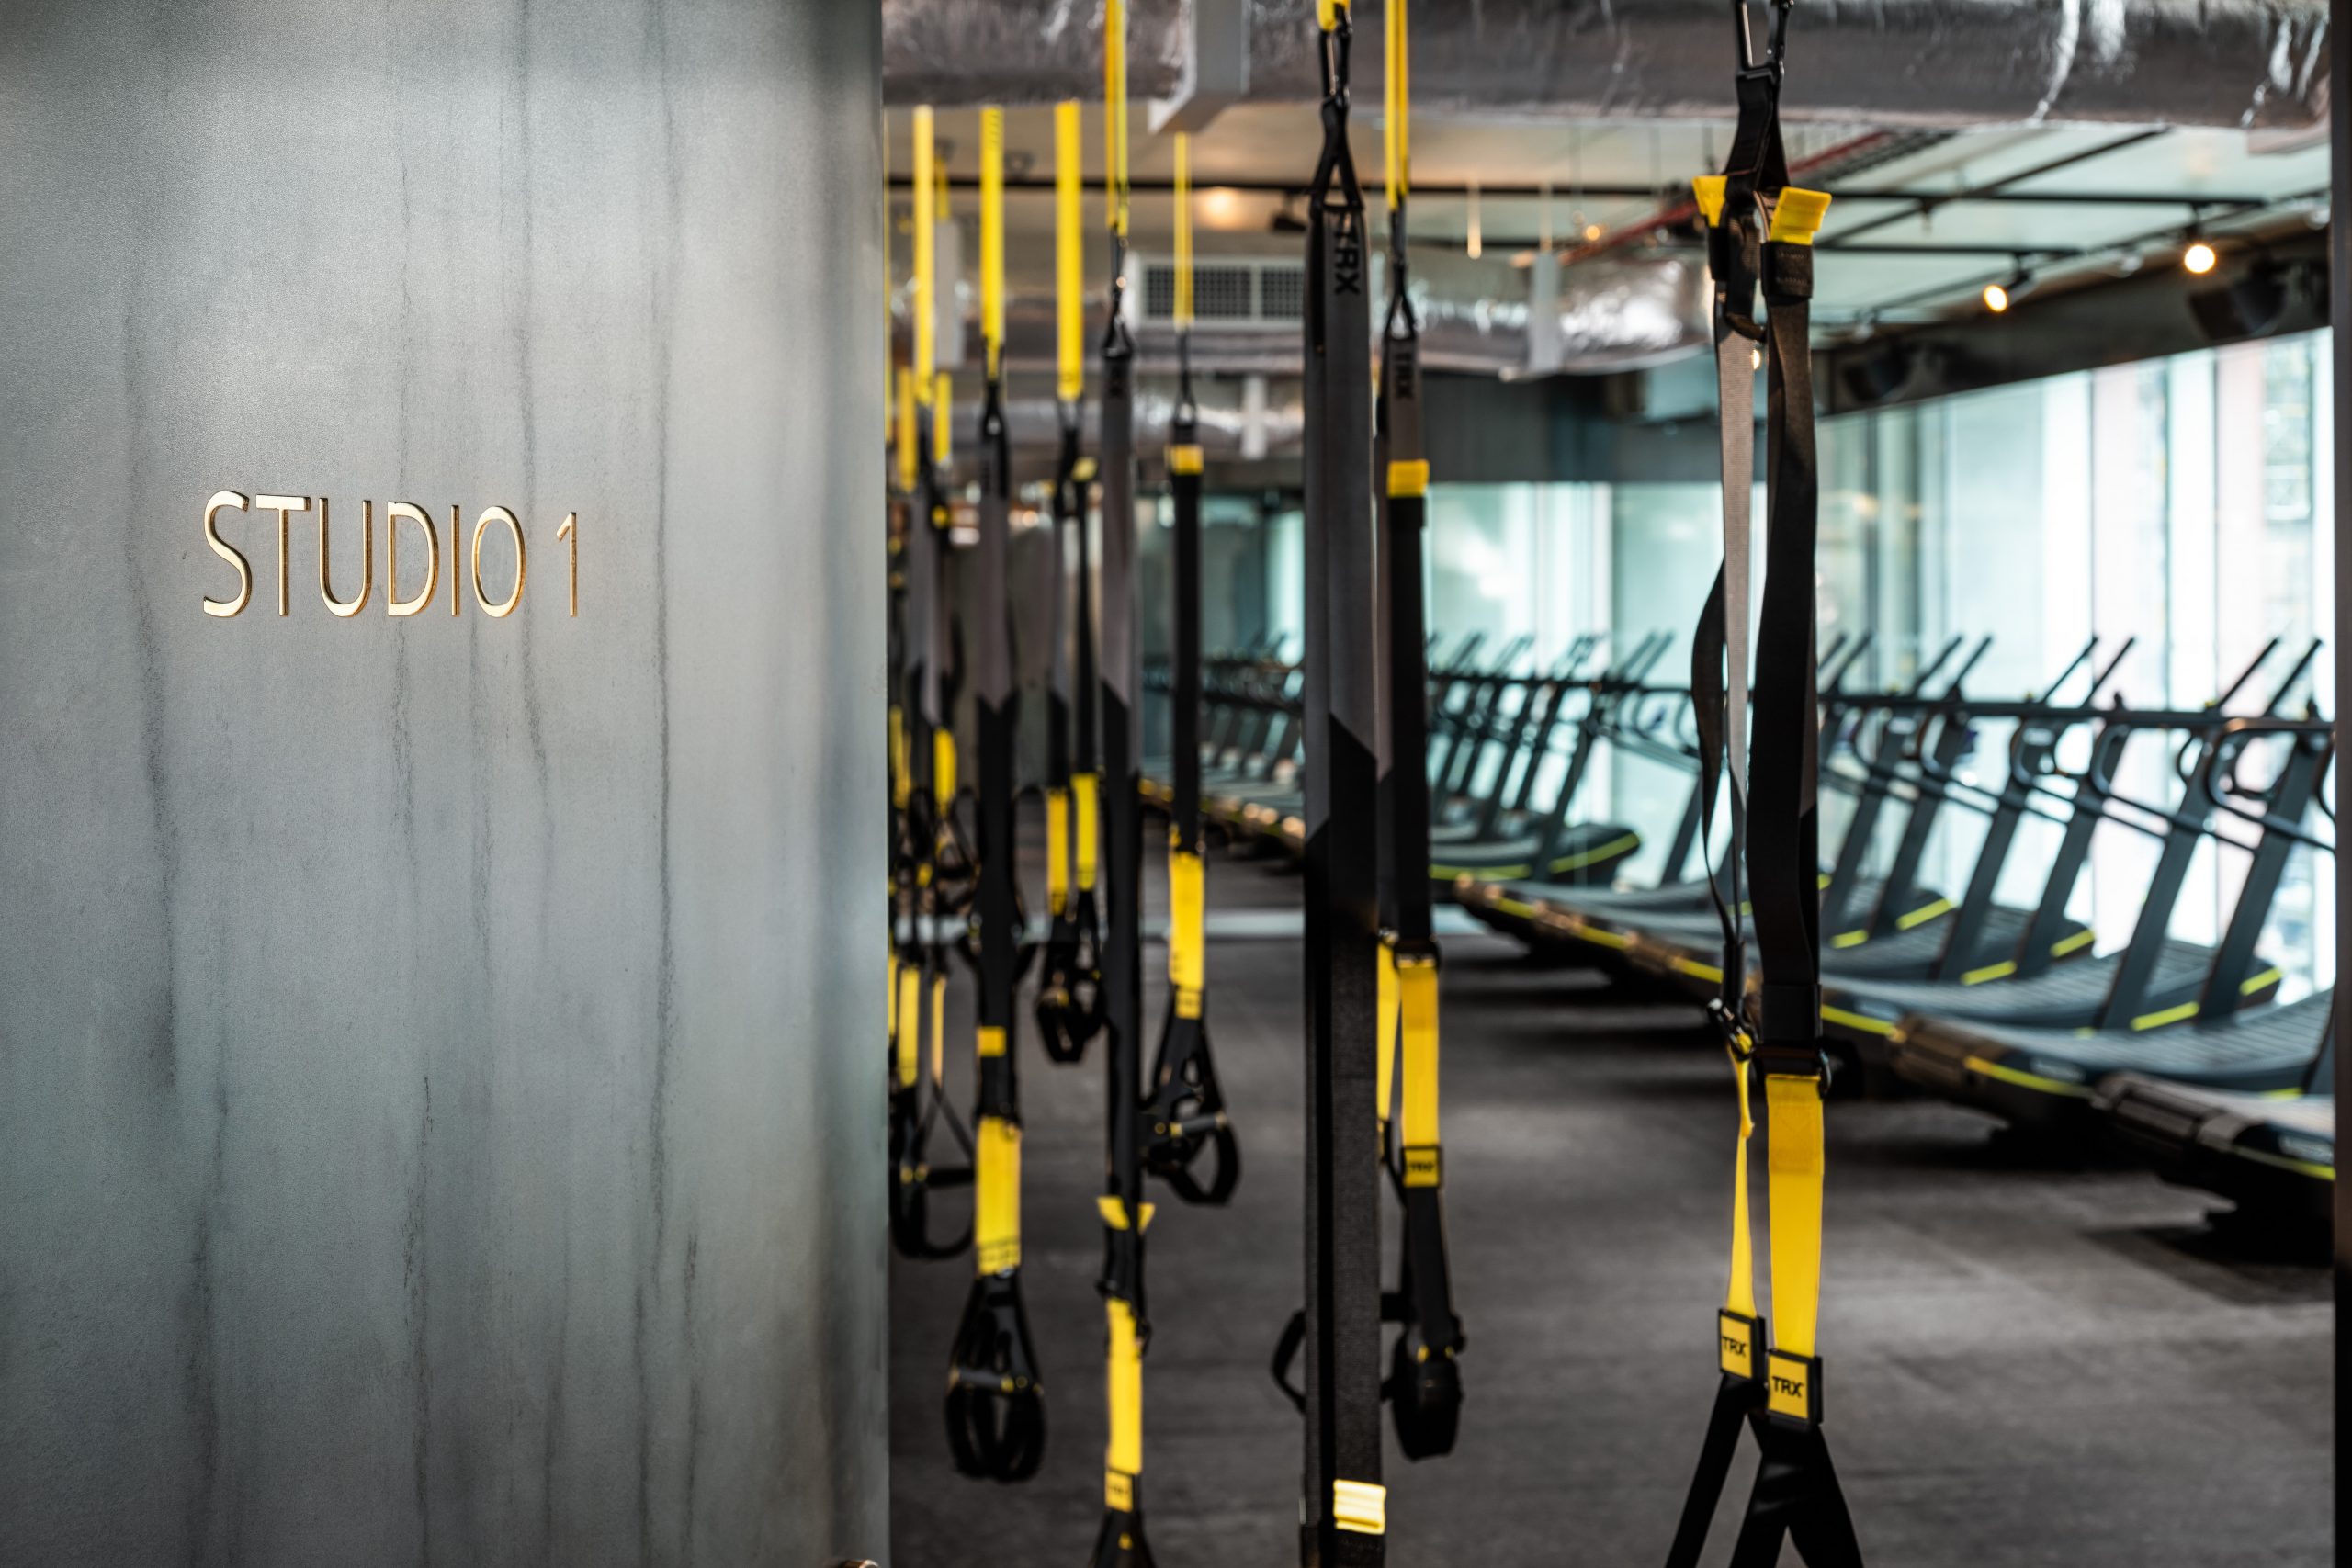 Equilibrium Launches New Flagship Studio In London With Innovative Class Concept